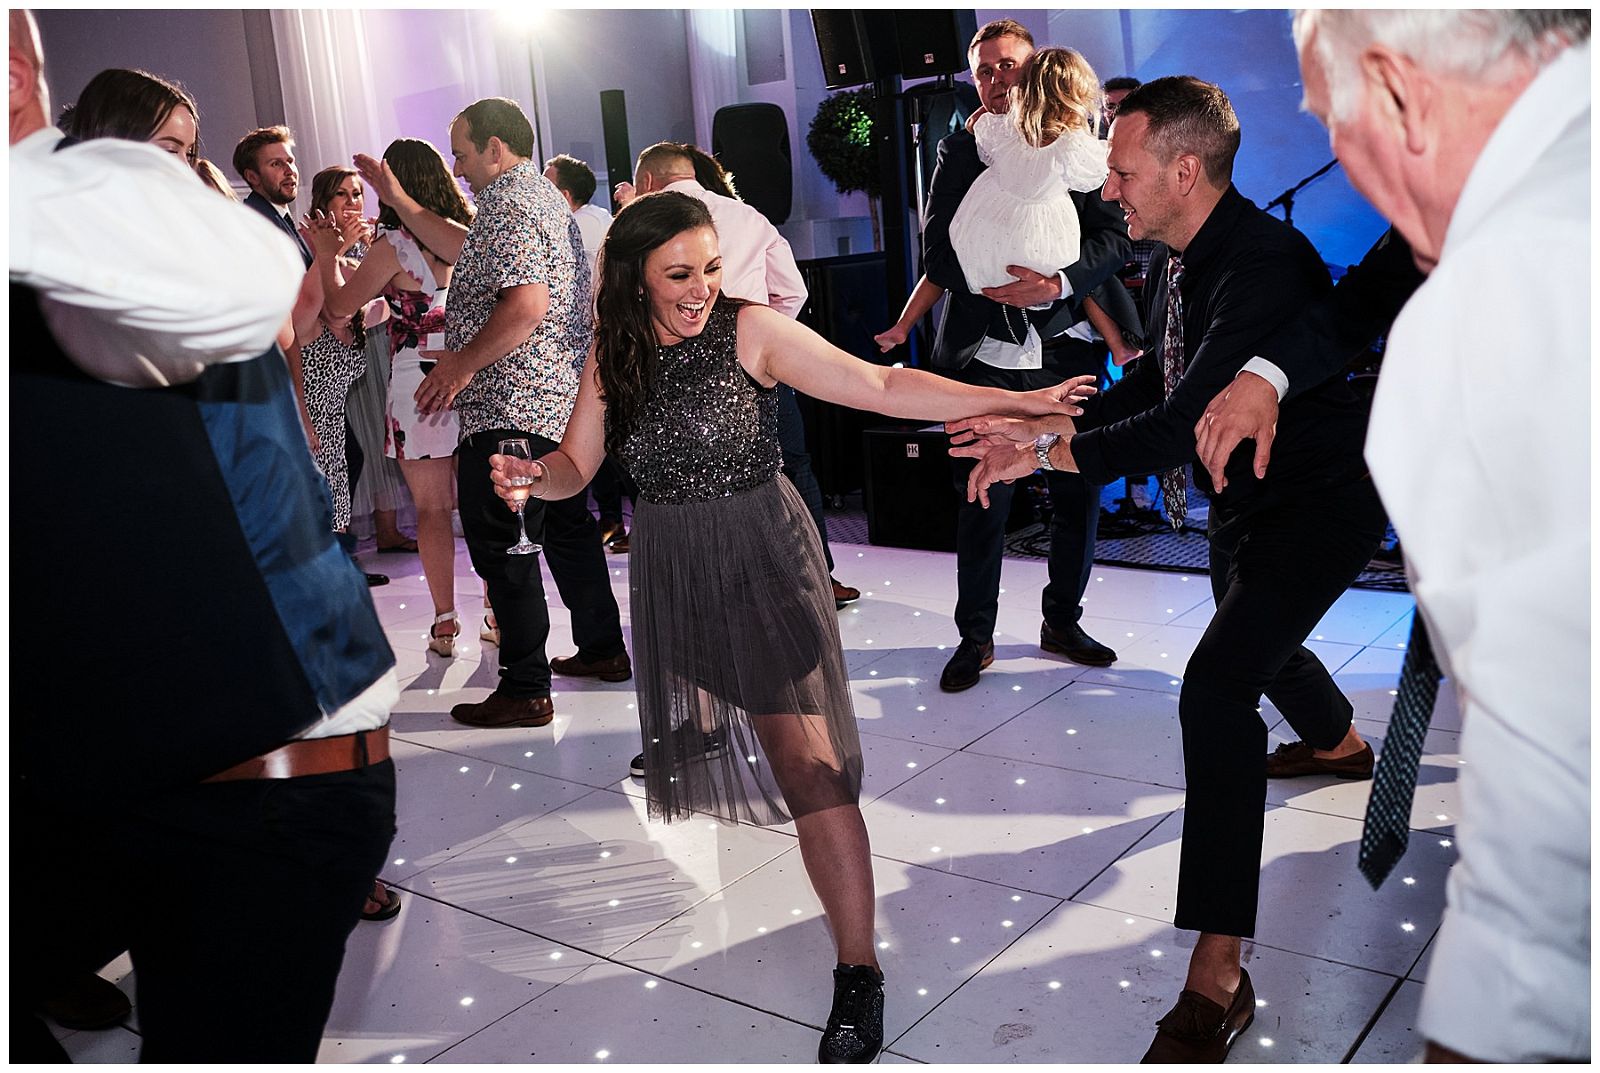 As the party really gets started and serious shapes are thrown on the dance floor, there are seriously great moments to be captured at Hawkstone Hall in Shrewsbury by Documentary Wedding Photographer Stuart James